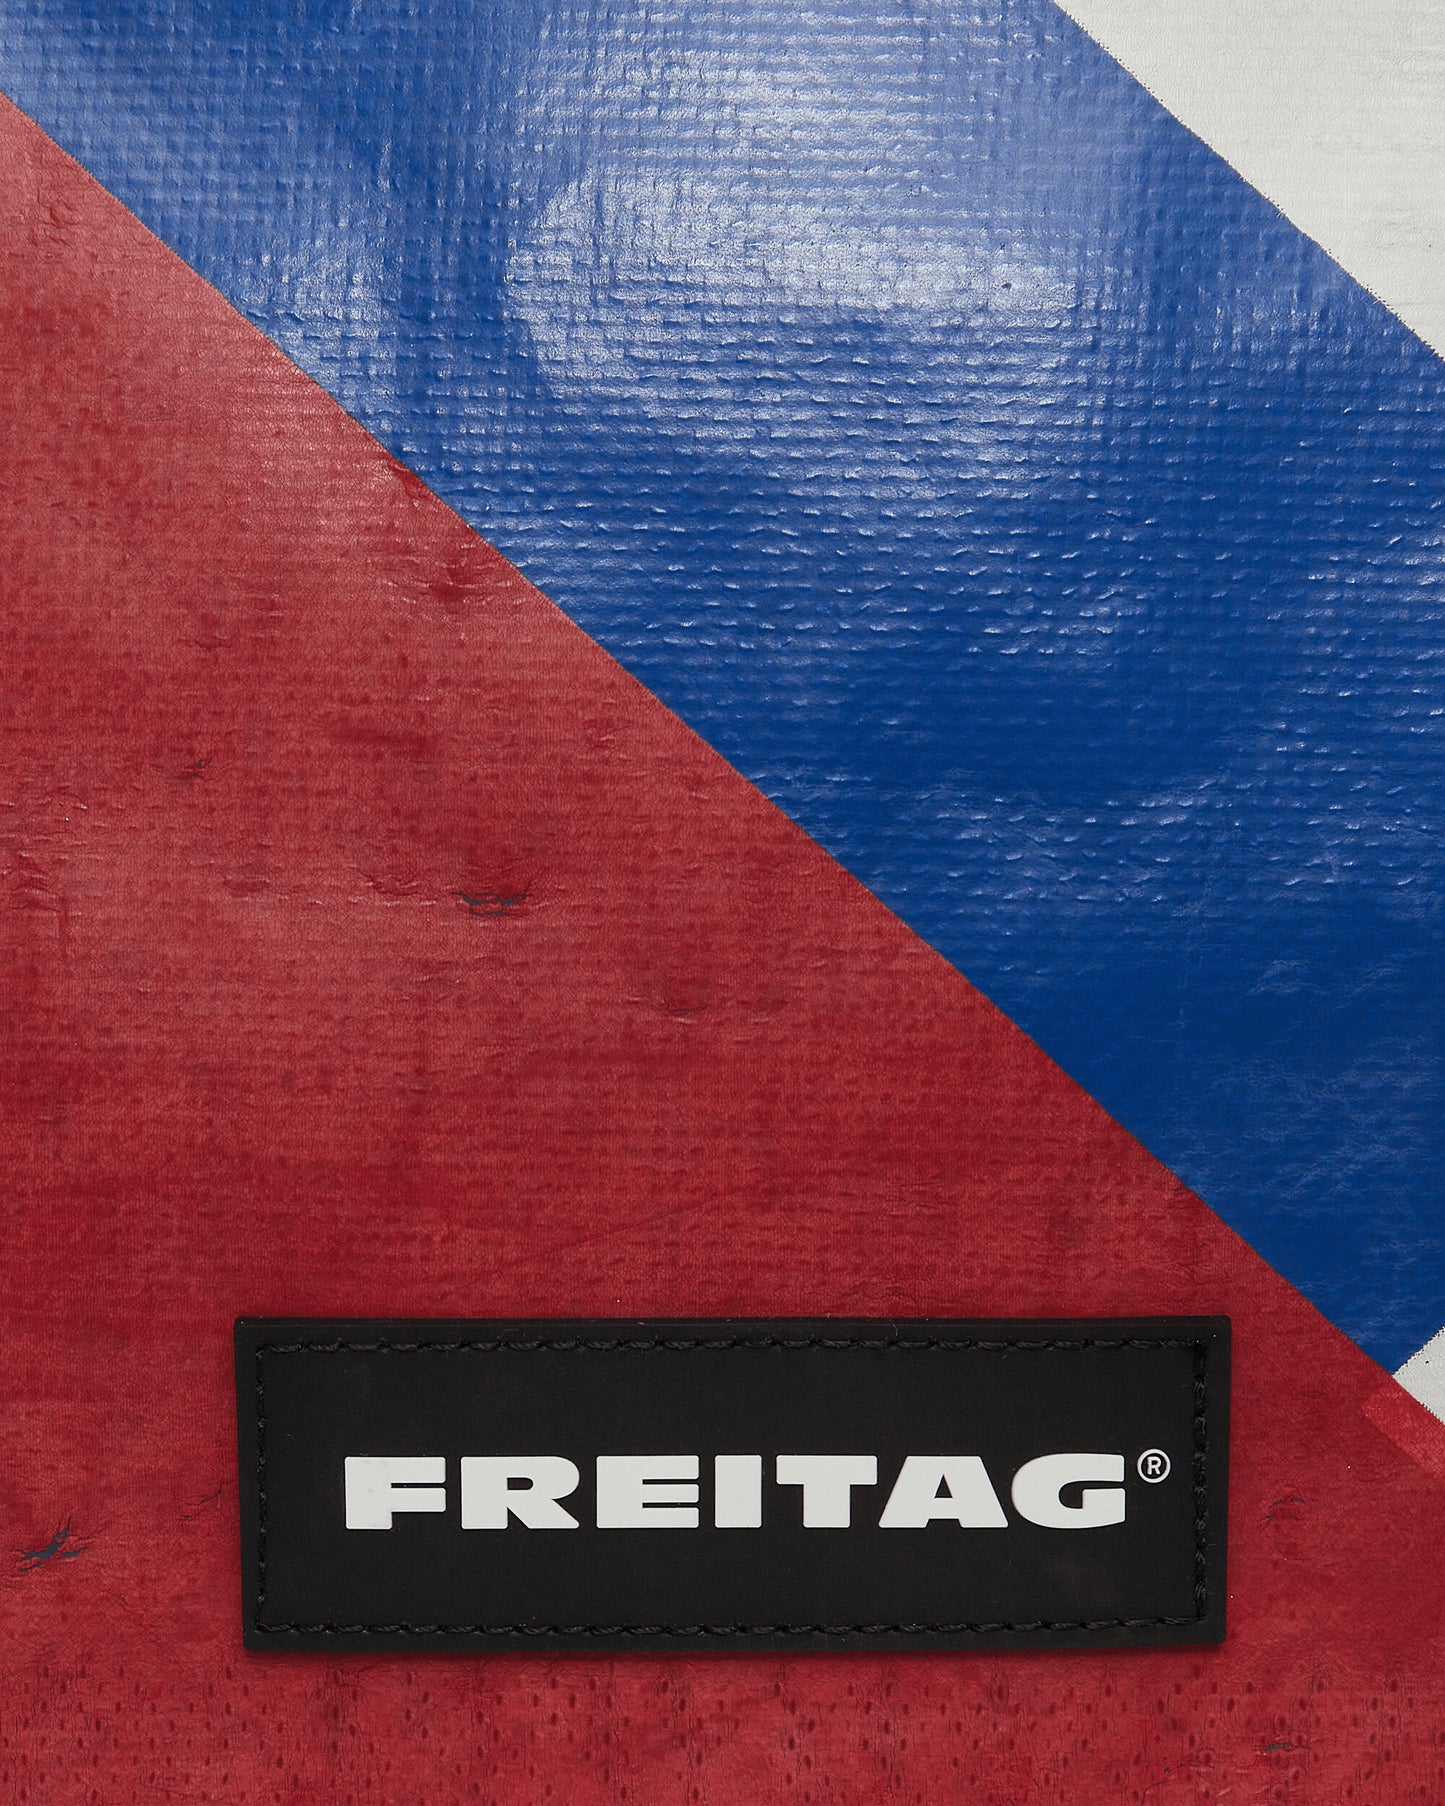 Freitag Dexter Multi Bags and Backpacks Shoulder Bags FREITAGF14 002